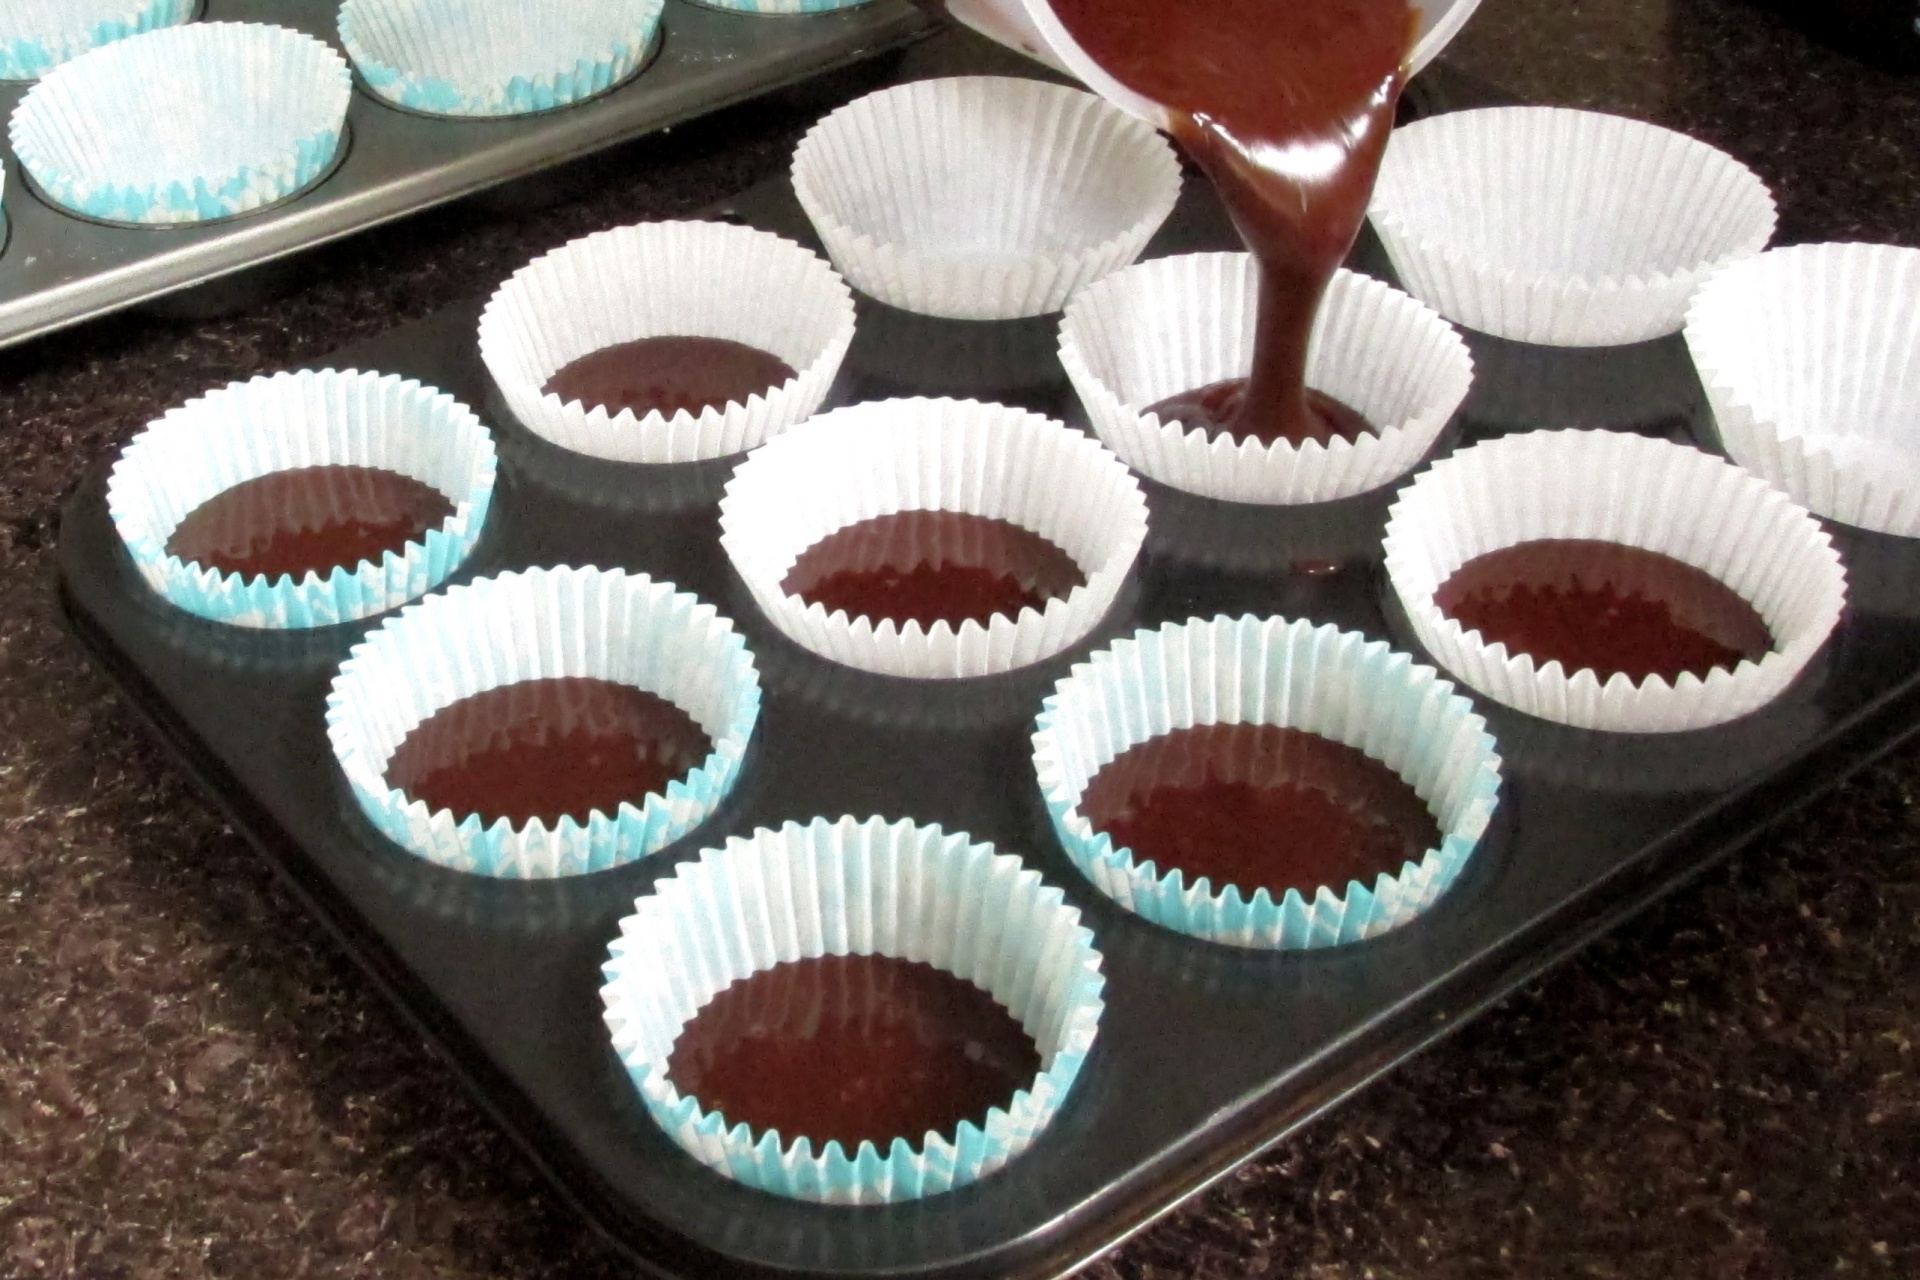 Chocolate Cupcake Batter Pouring